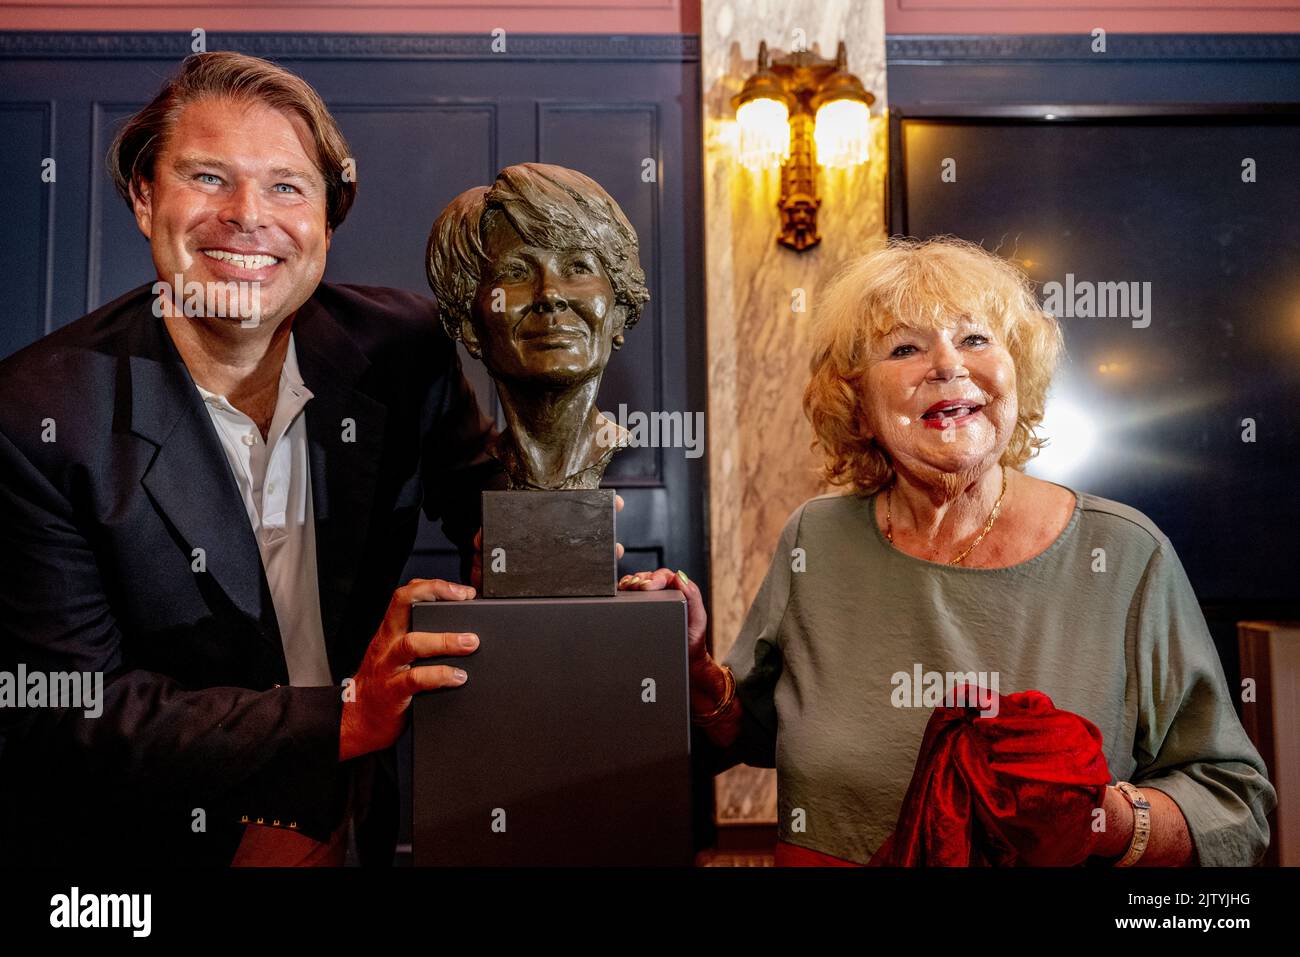 2022-09-02 15:40:50 THE HAGUE - Tineke de Nooij unveils a bronze bust of the deceased singer Annneke Gronloh in the Koninklijke Schouwburg. Gronloh died on September 14, 2018 from the effects of a lung disease. She would have turned 80 this year. ANP ROBIN UTRECHT netherlands out - belgium out Stock Photo